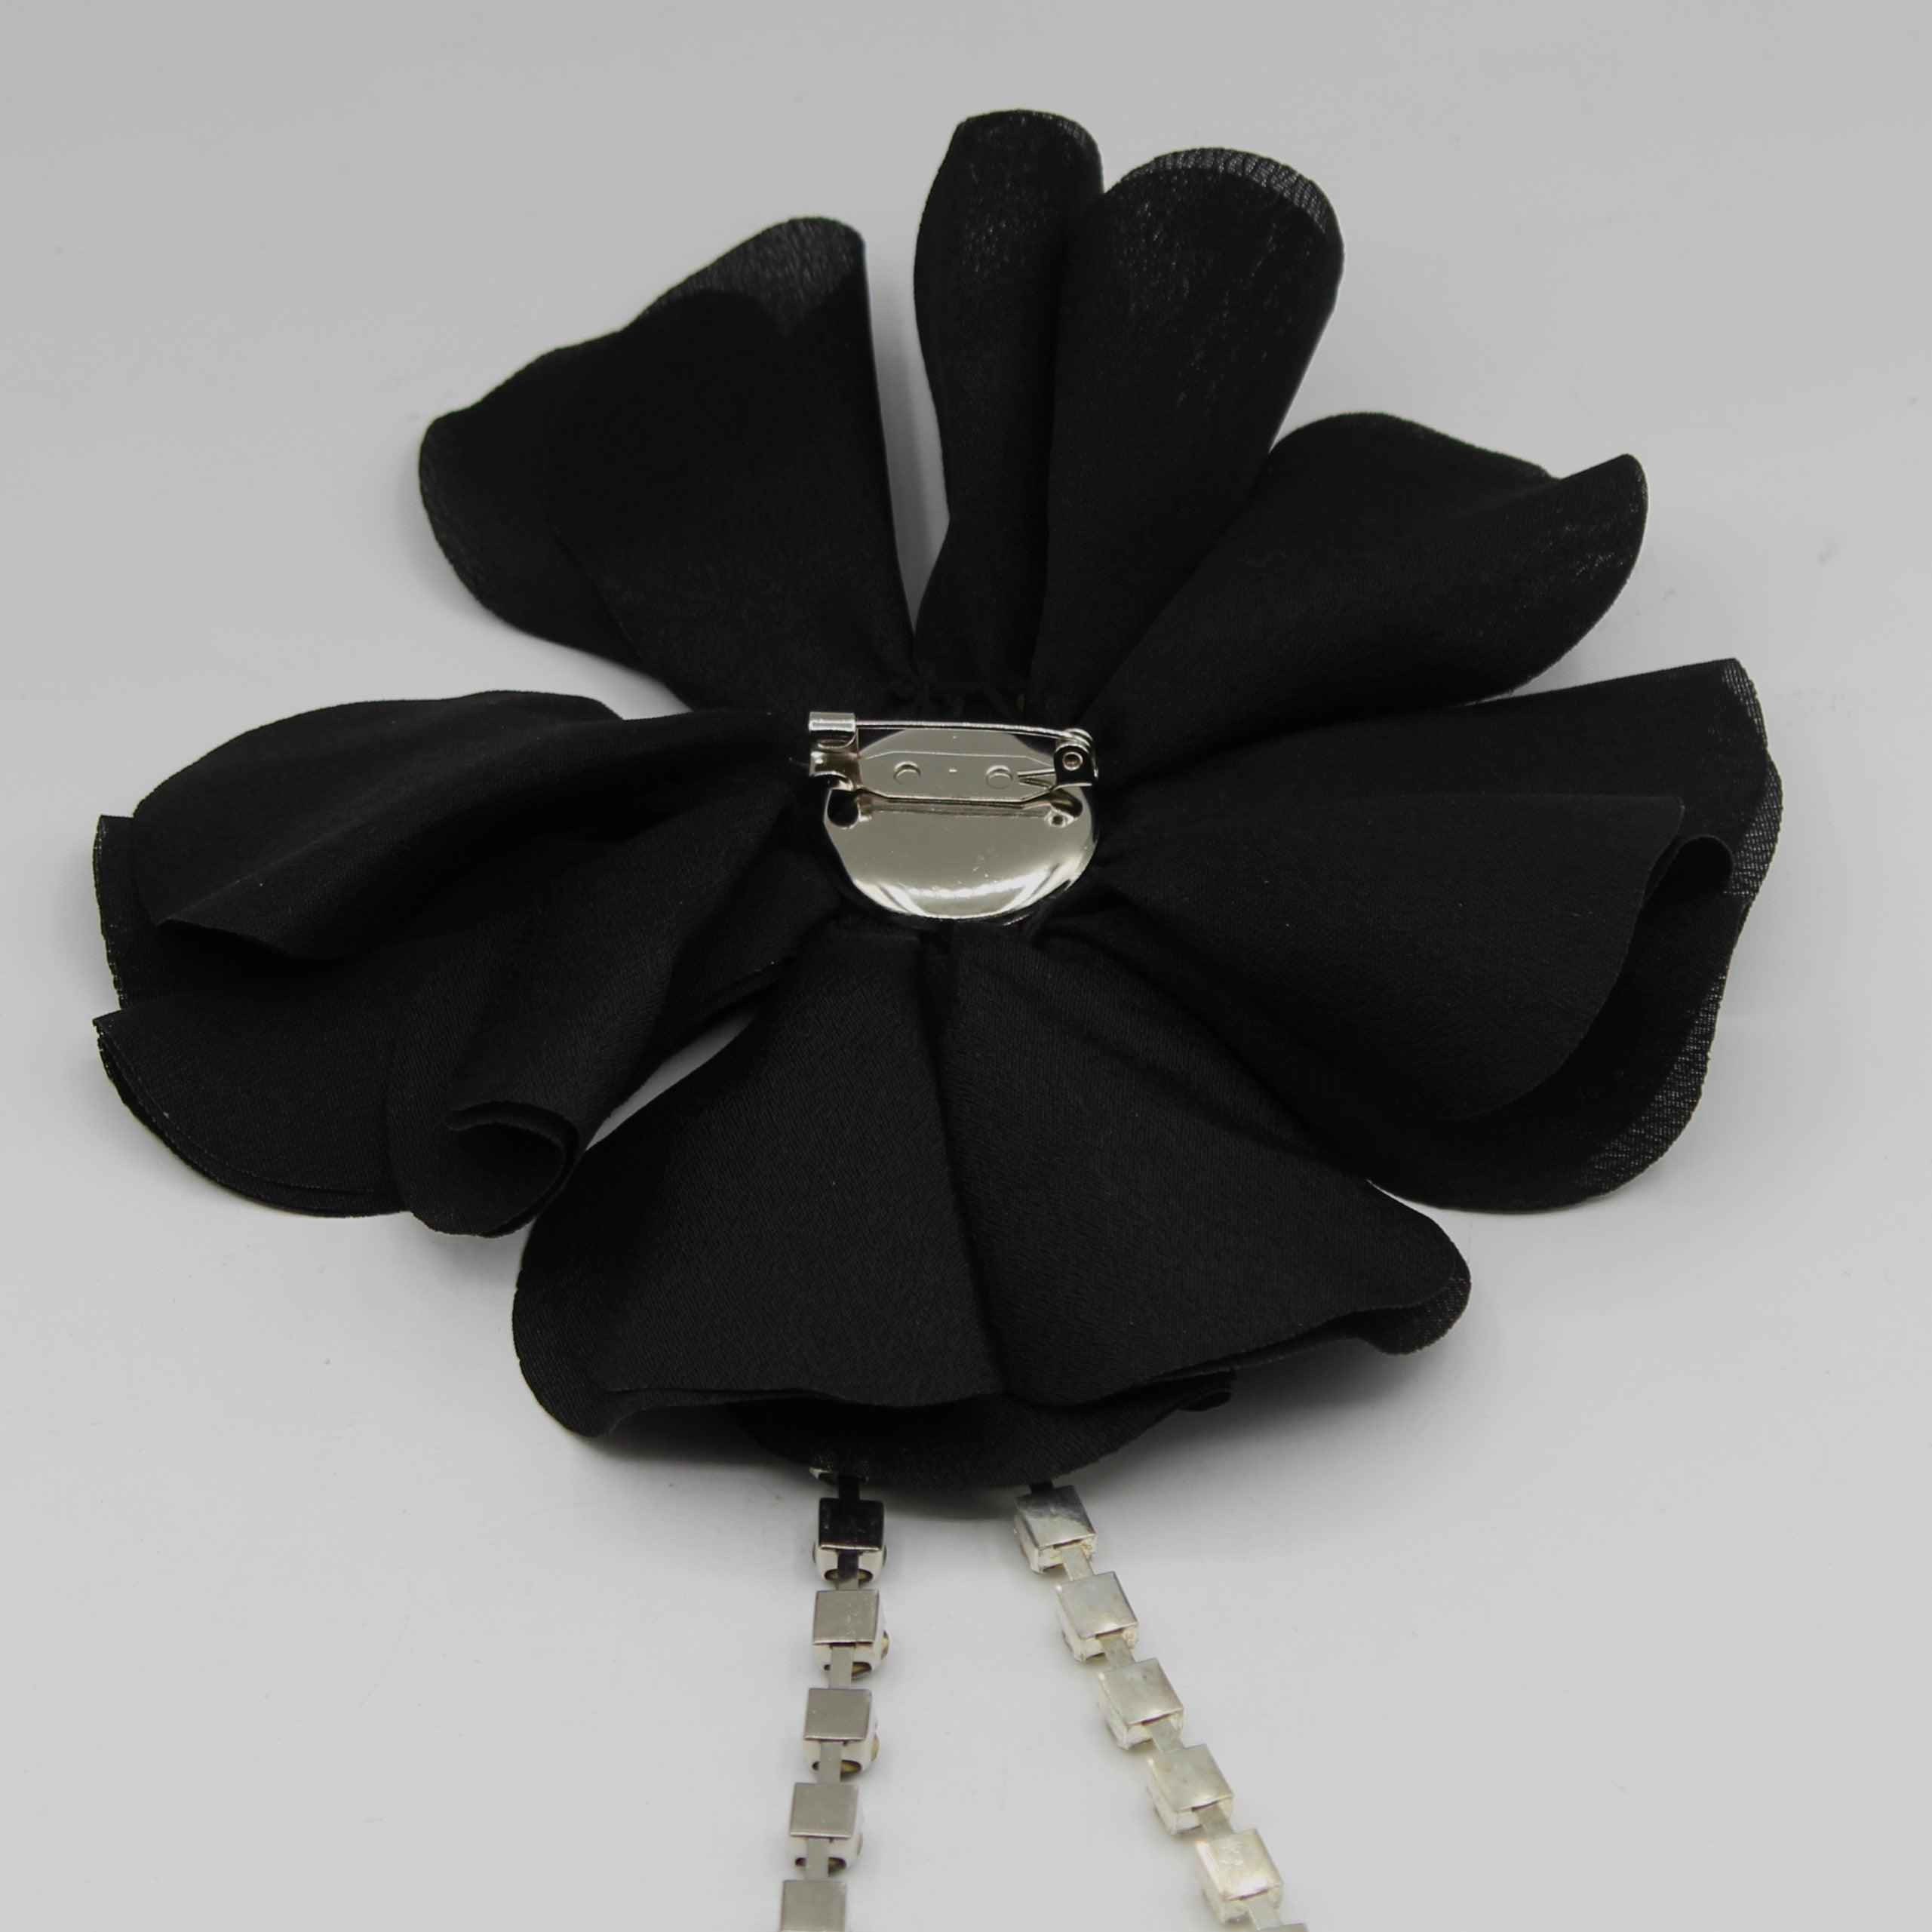 Large Fabric Flower Brooch with Strass chain, Large Flower for ceremony, Hanging accessory, BLACK color #BRO1002 - ACCESSOIRES LEDUC BV